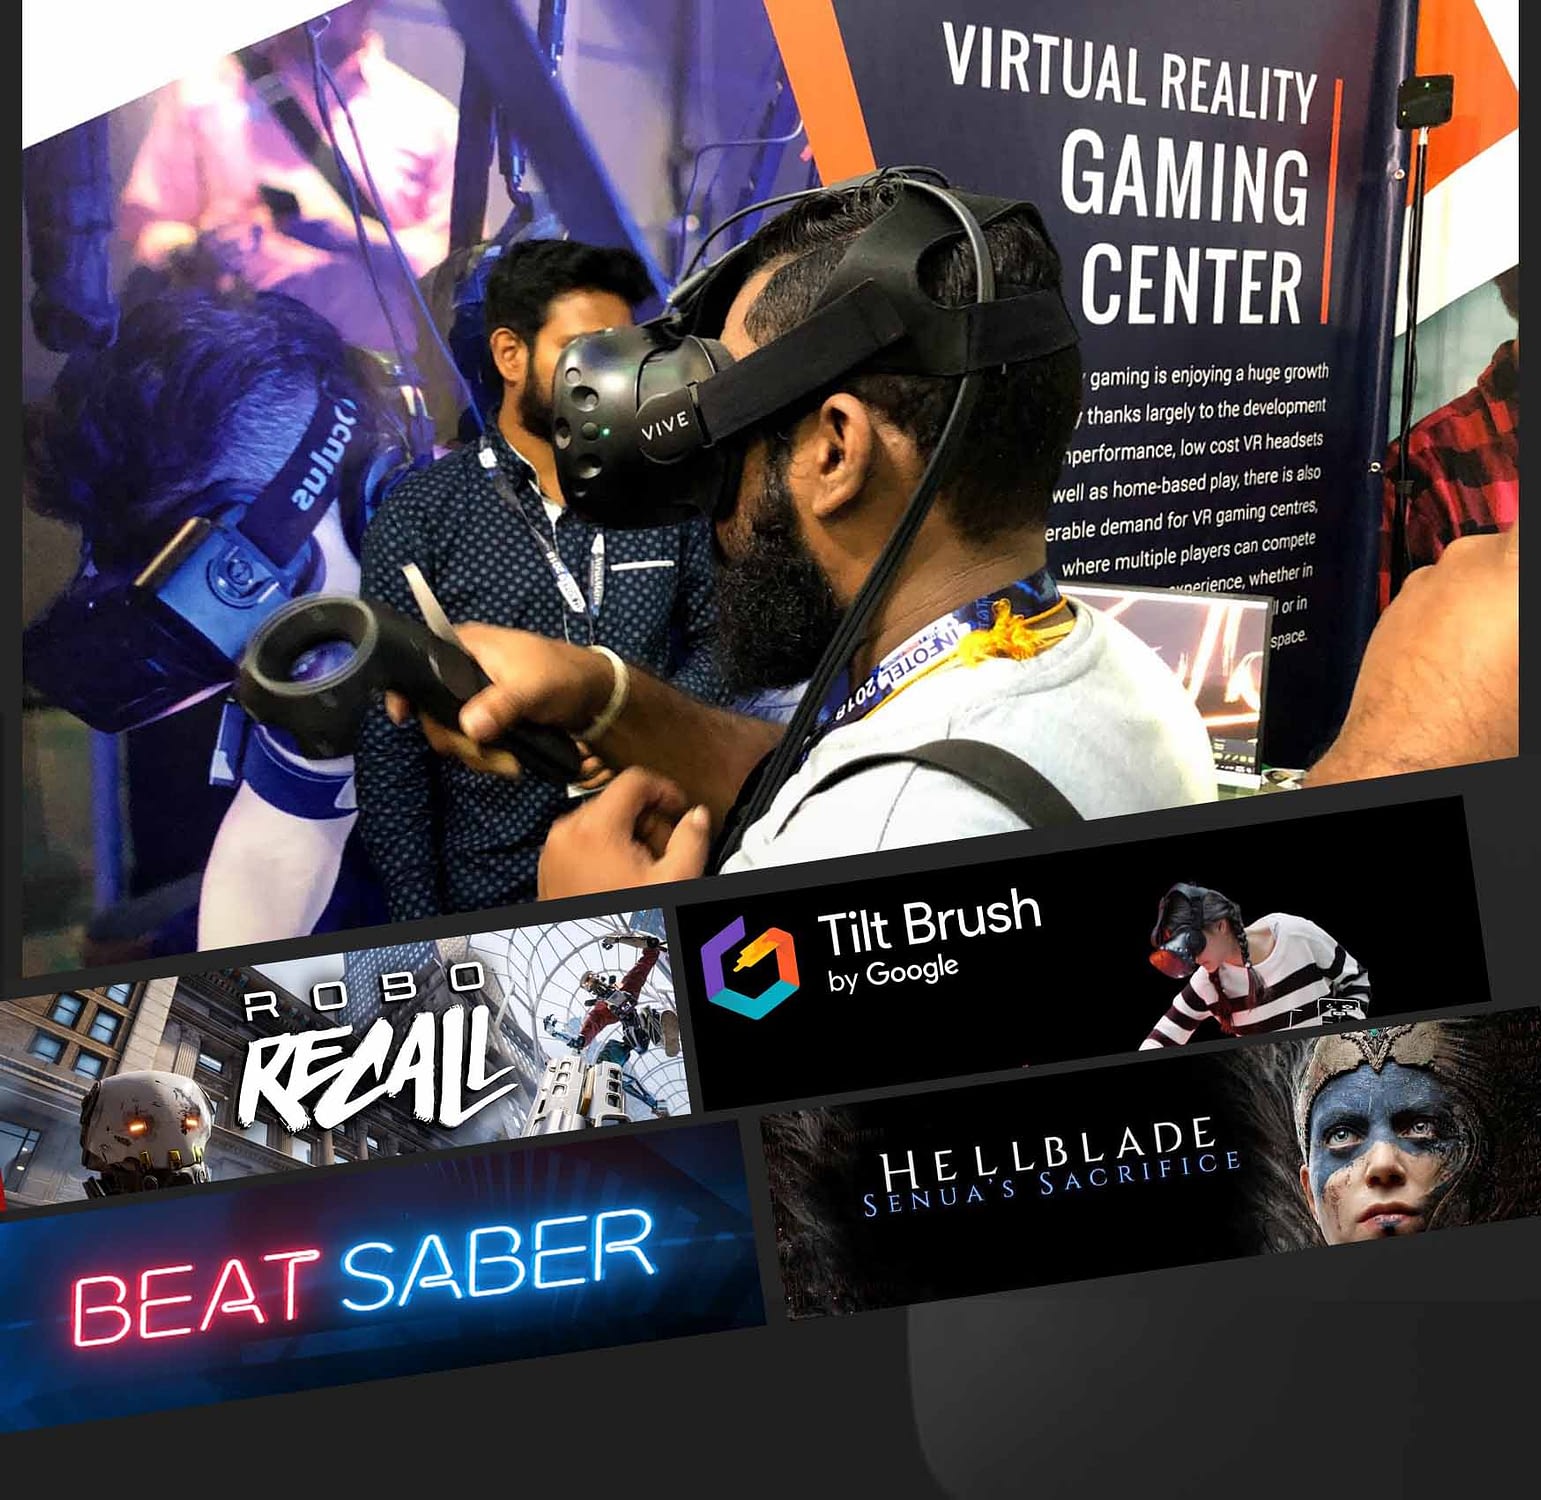 If you’re not familiar with VR headsets, you might require a little assistance. Our well-trained expert rentals can help alleviate your stress if you feel you need help setting up the hardware. We can make renting the HTC Vive easy. Permit our experts to see you through the process.